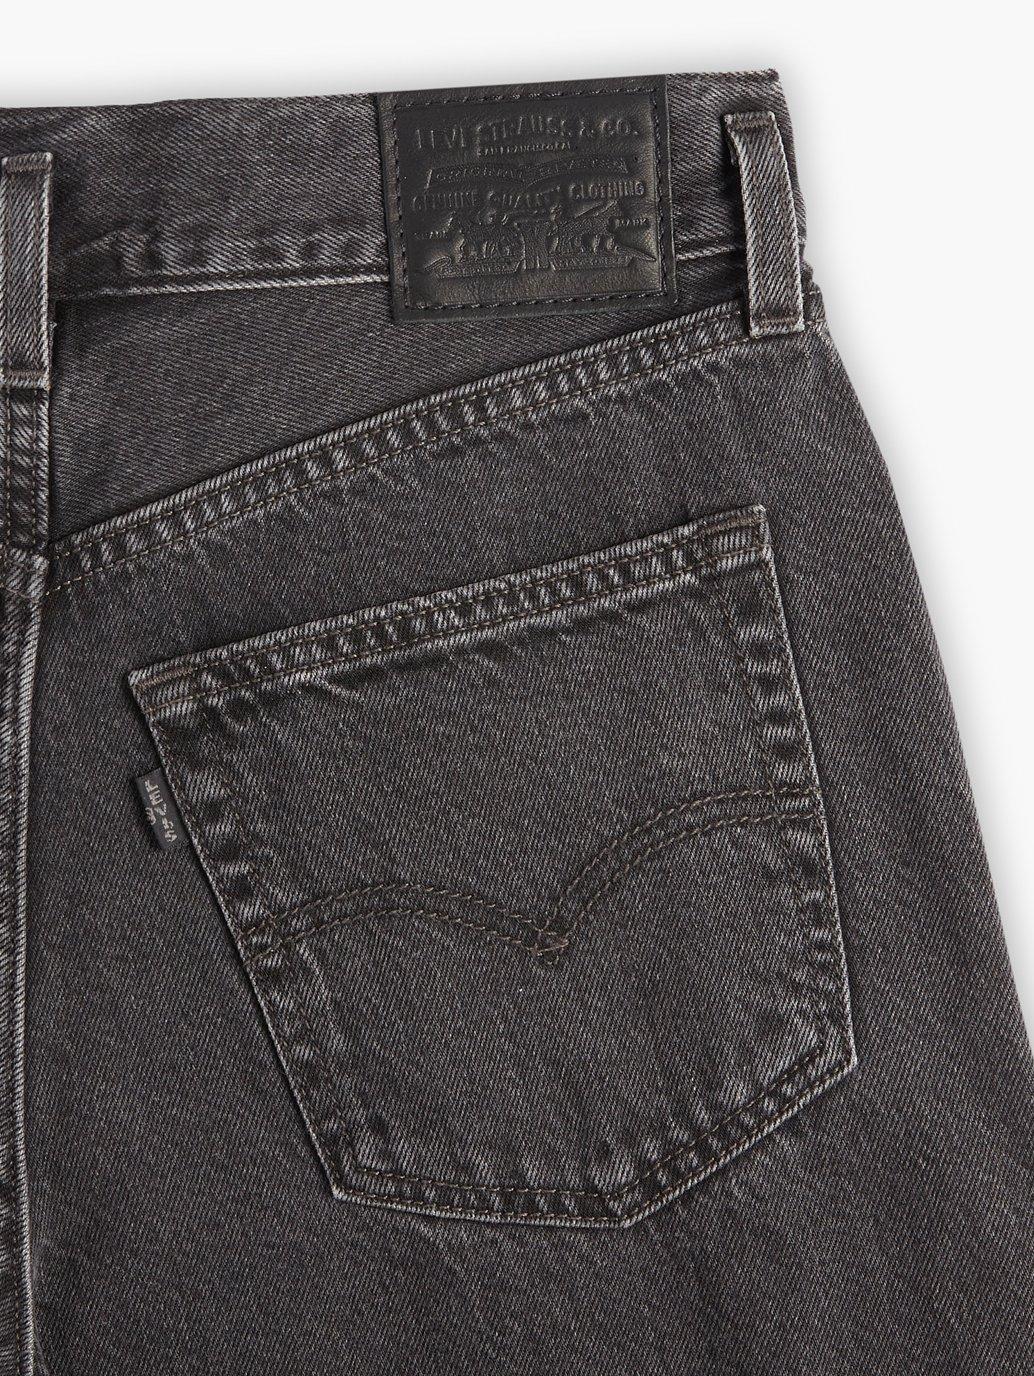 Buy Levi's® Women's Belted Baggy Jeans | Levi’s® Official Online Store MY